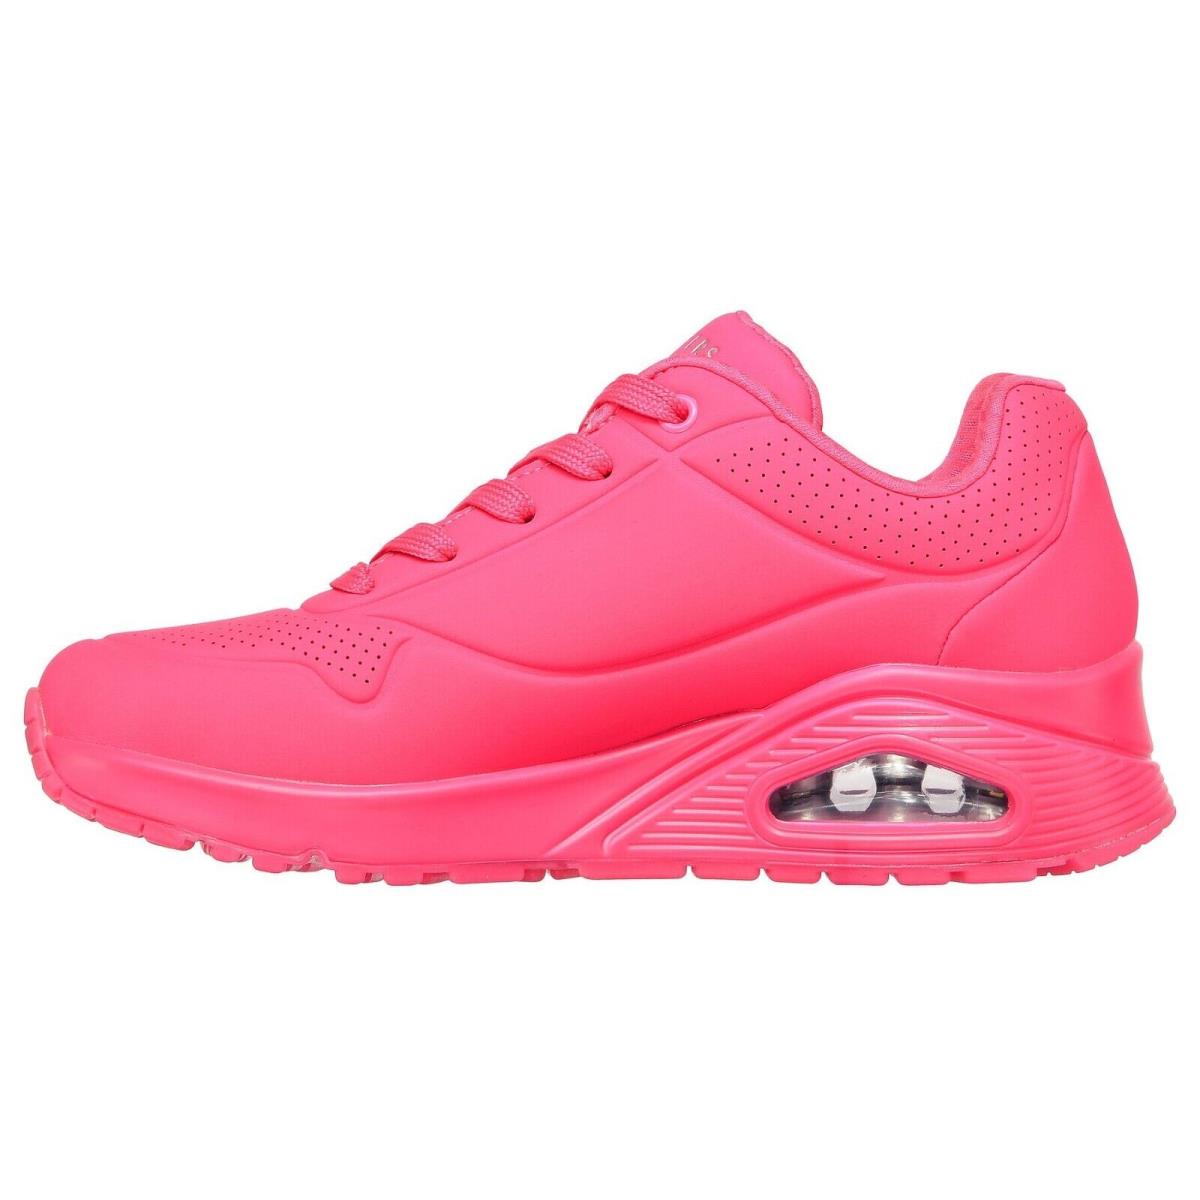 Skechers shoes Uno Night Shades - Hot Pink 3